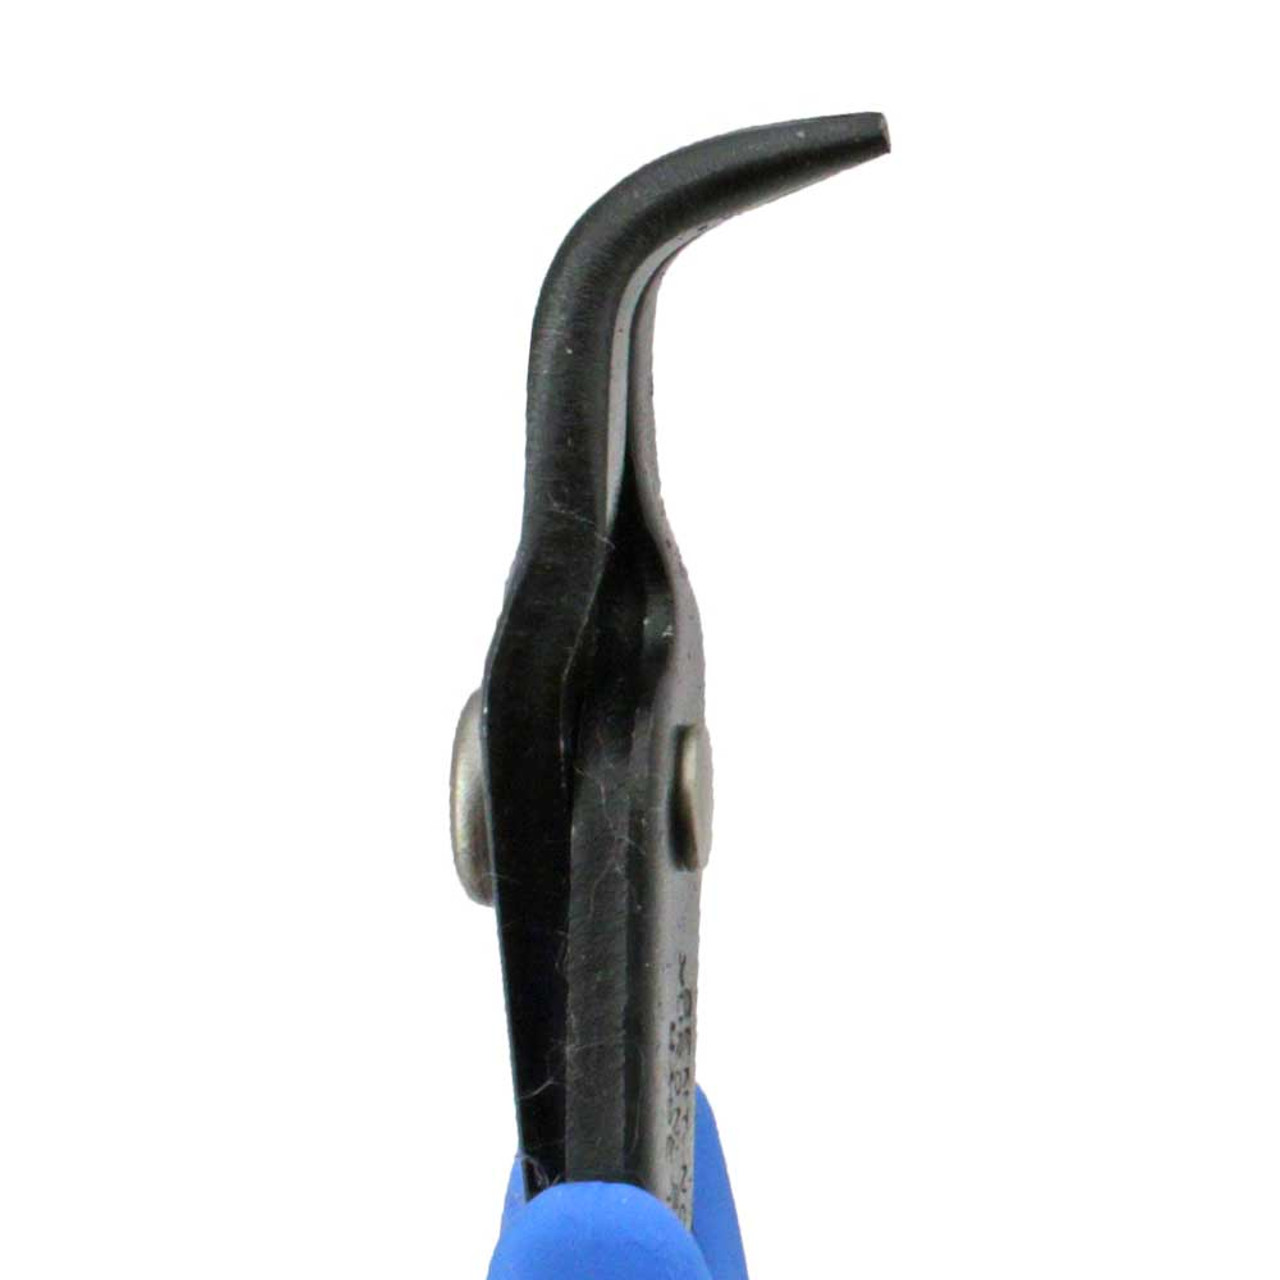 Xuron 450BN - Bent Nose Pliers - Angled - 5